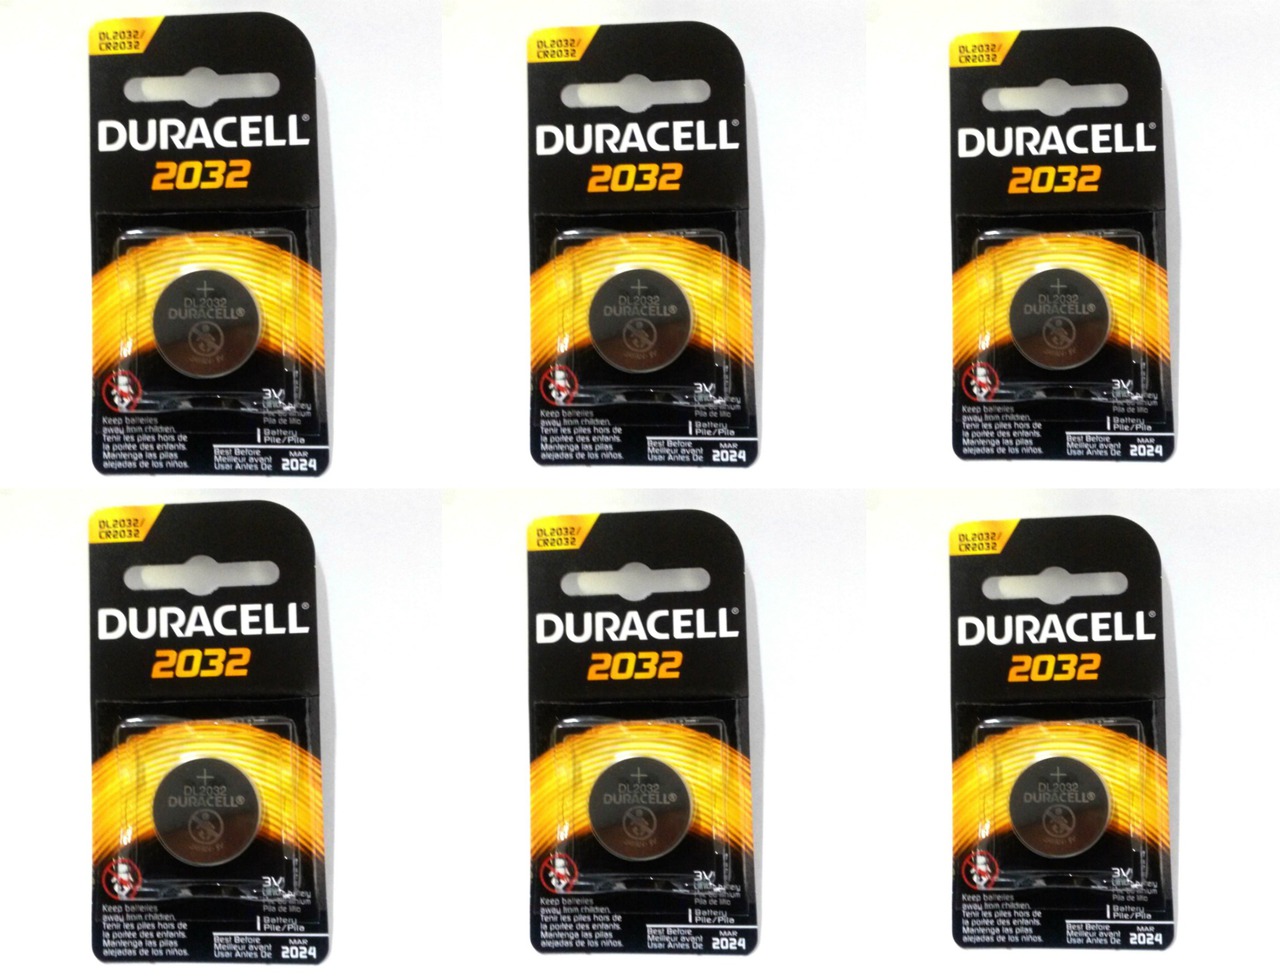 Duracell CR2032 Coin Battery - 6 Pack + FREE SHIPPING